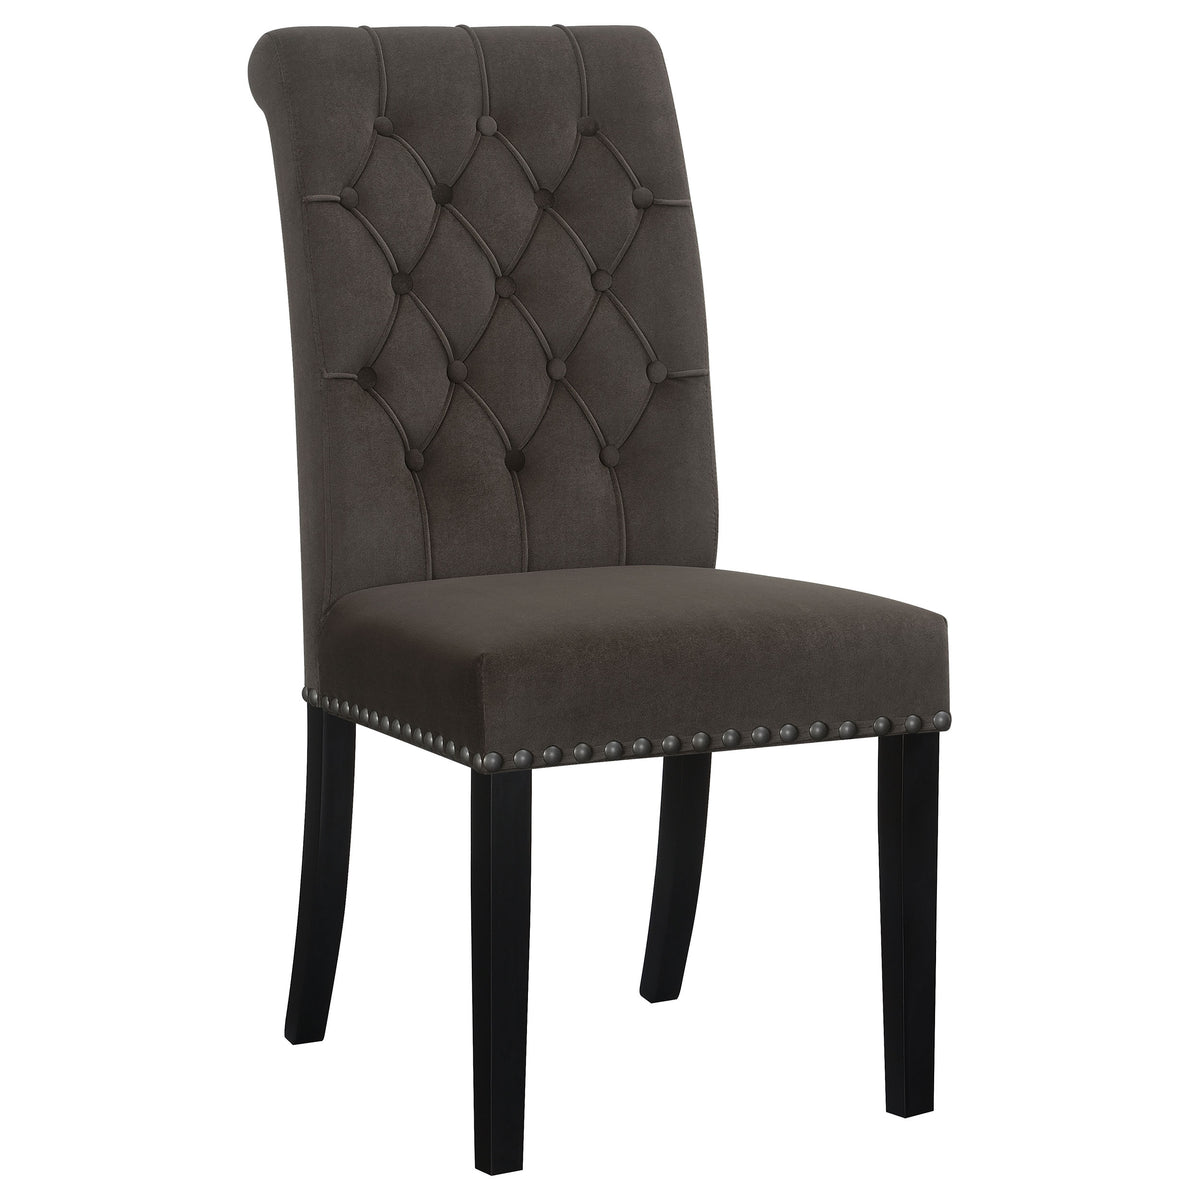 Alana Upholstered Tufted Side Chairs with Nailhead Trim (Set of 2)  Half Price Furniture